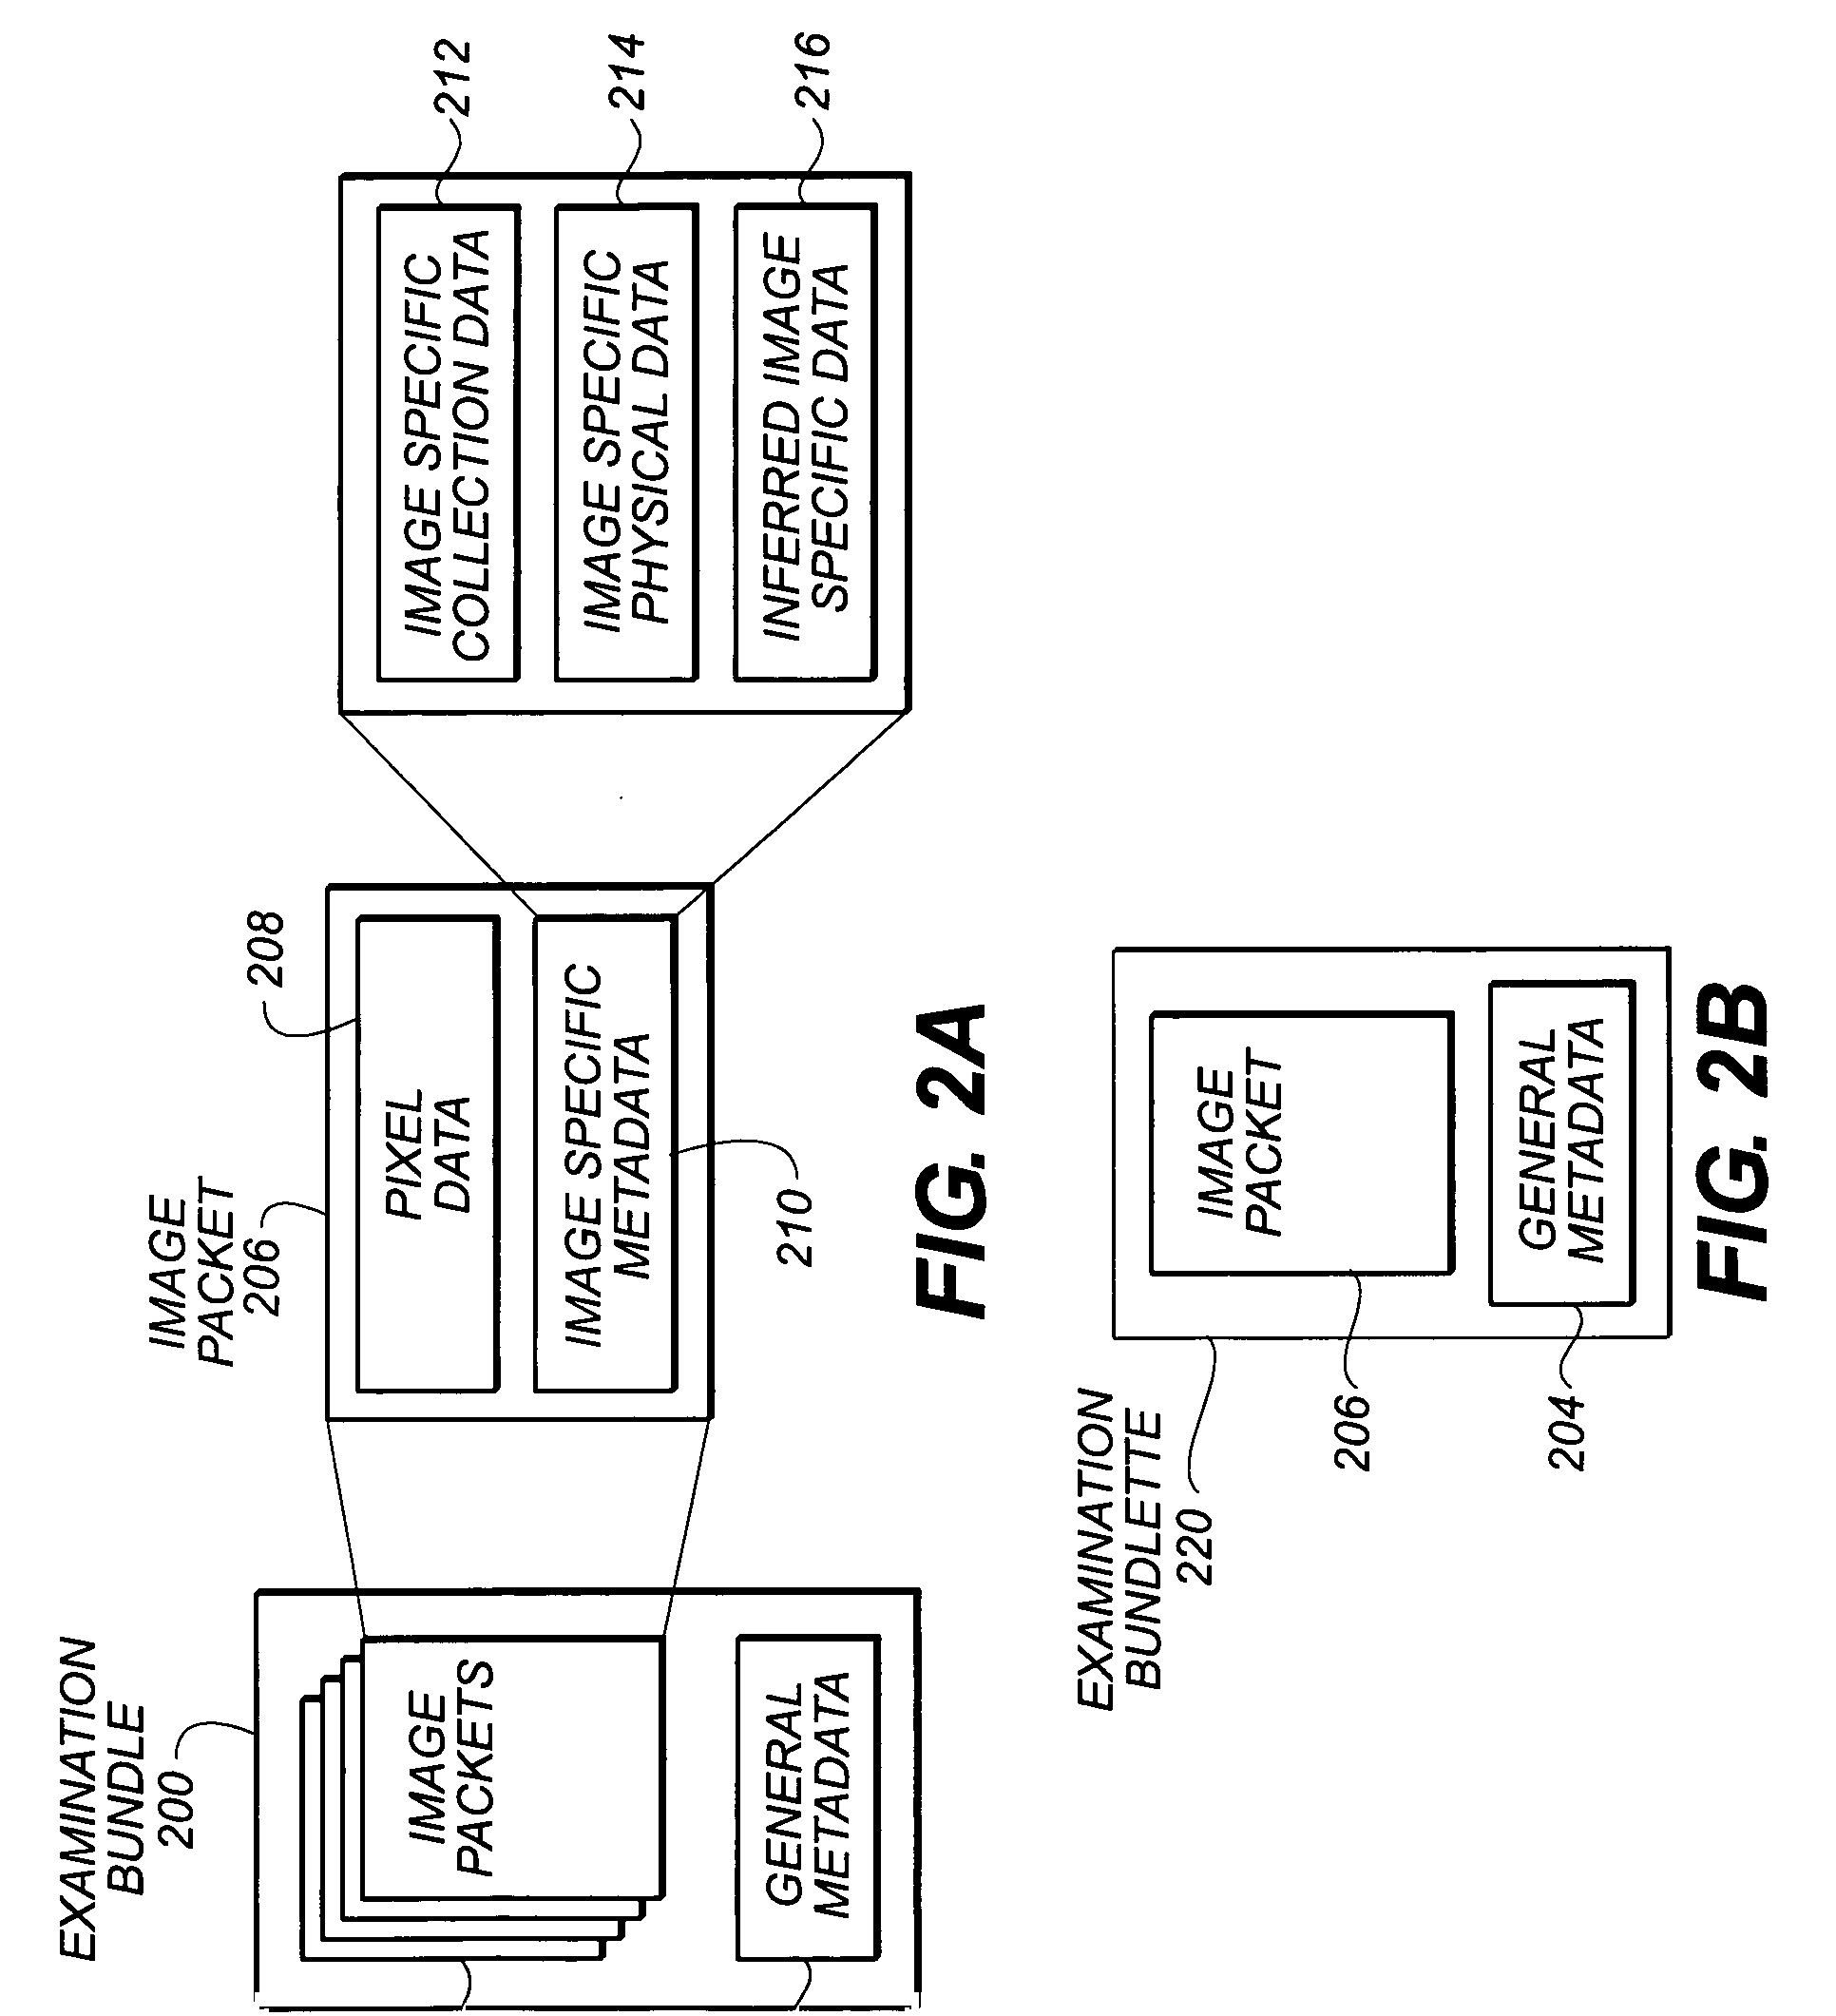 Method for real-time remote diagnosis of in vivo images